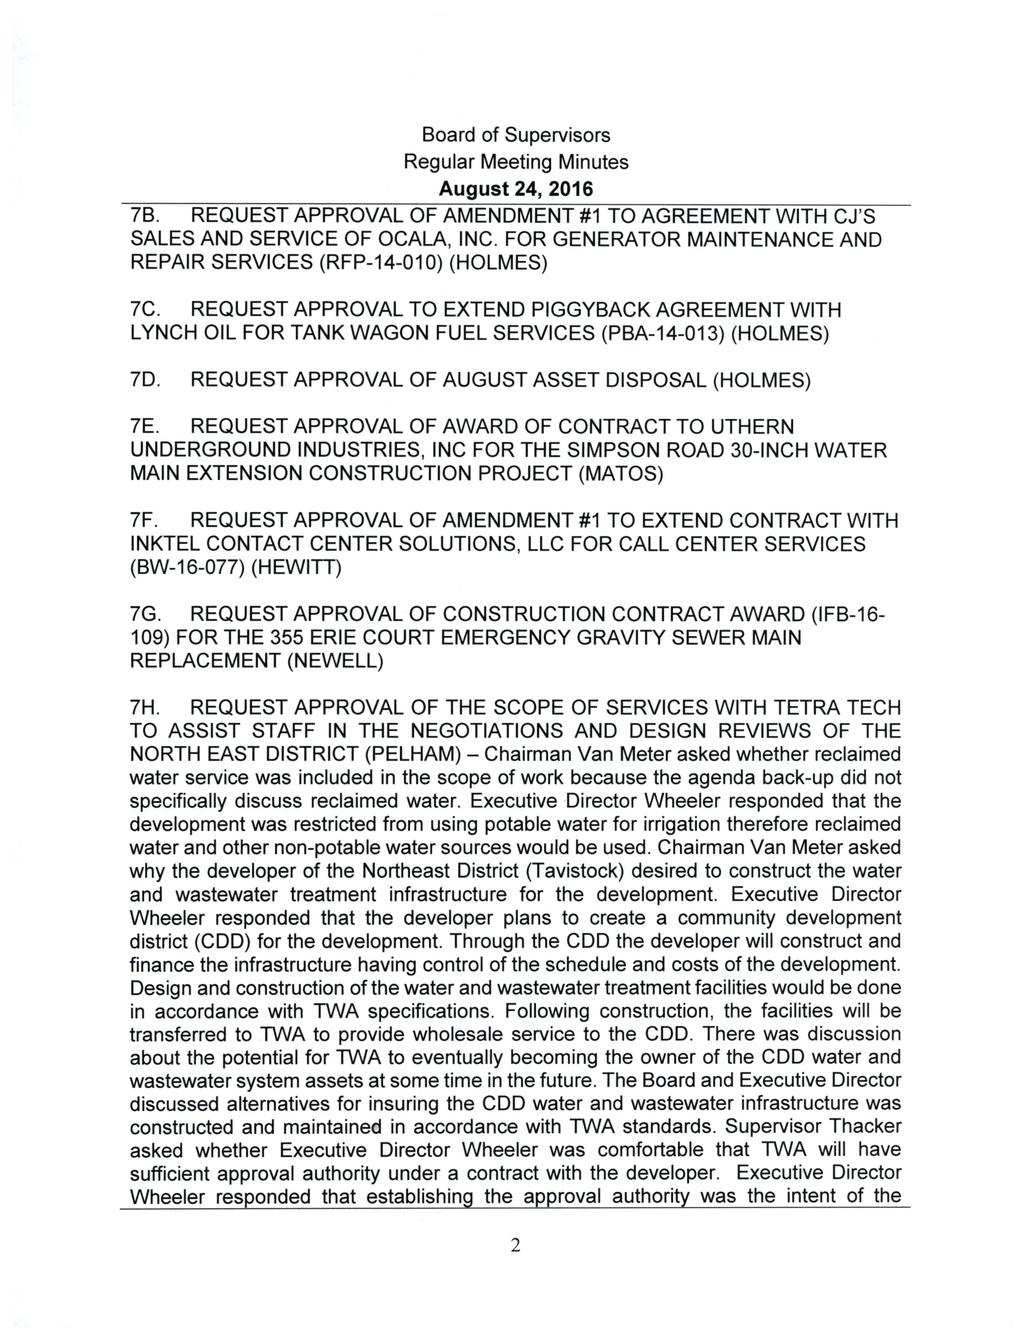 Board of Supervisors 7B. REQUEST APPROVAL OF AMENDMENT # 1 TO AGREEMENT WITH CTS SALES AND SERVICE OF OCALA, INC. FOR GENERATOR MAINTENANCE AND REPAIR SERVICES ( RFP -14-010) ( HOLMES) 7C.